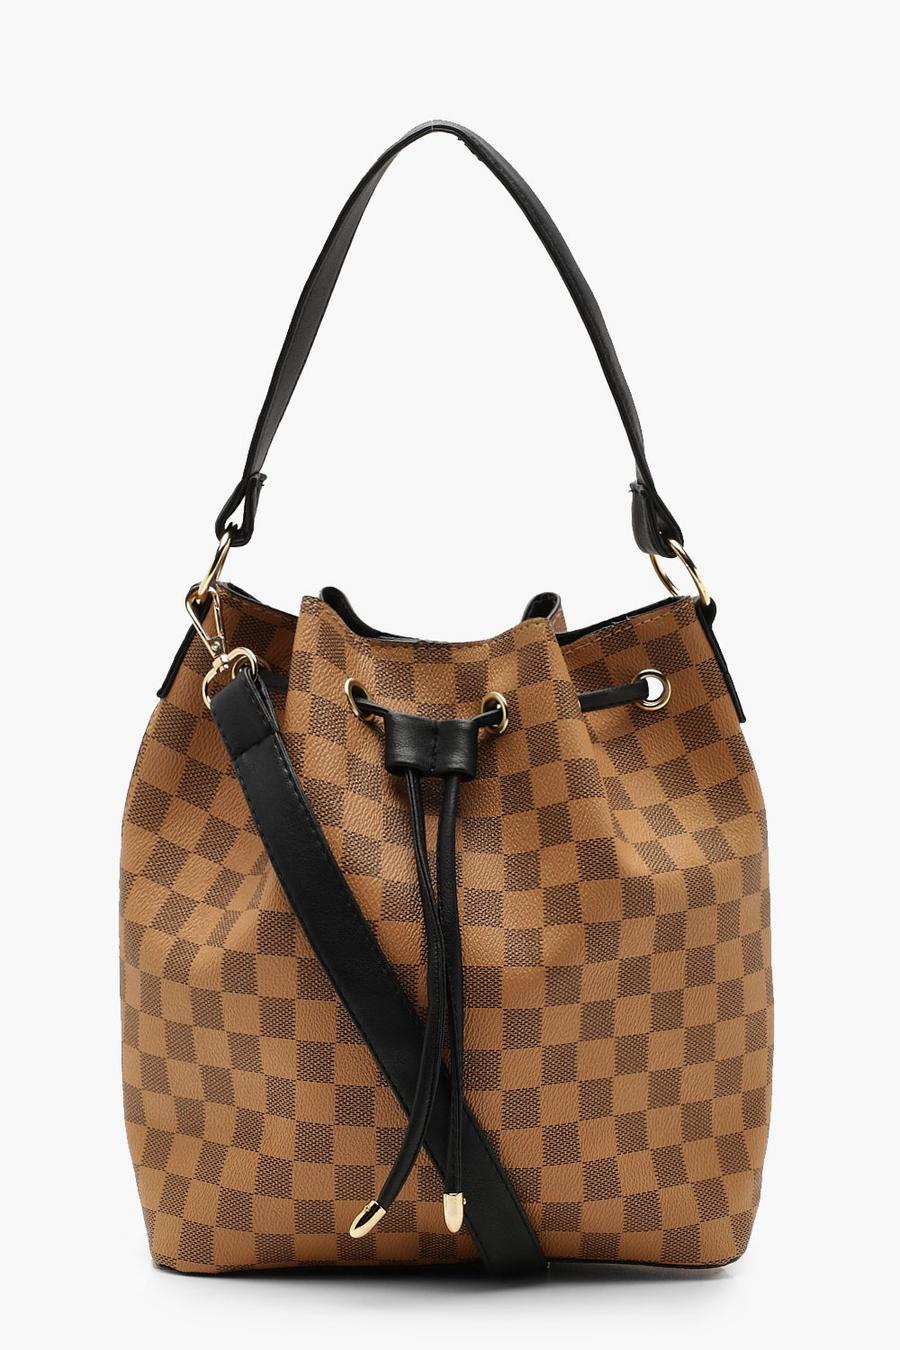 Bags, Brand New Brown Checkered Duffle